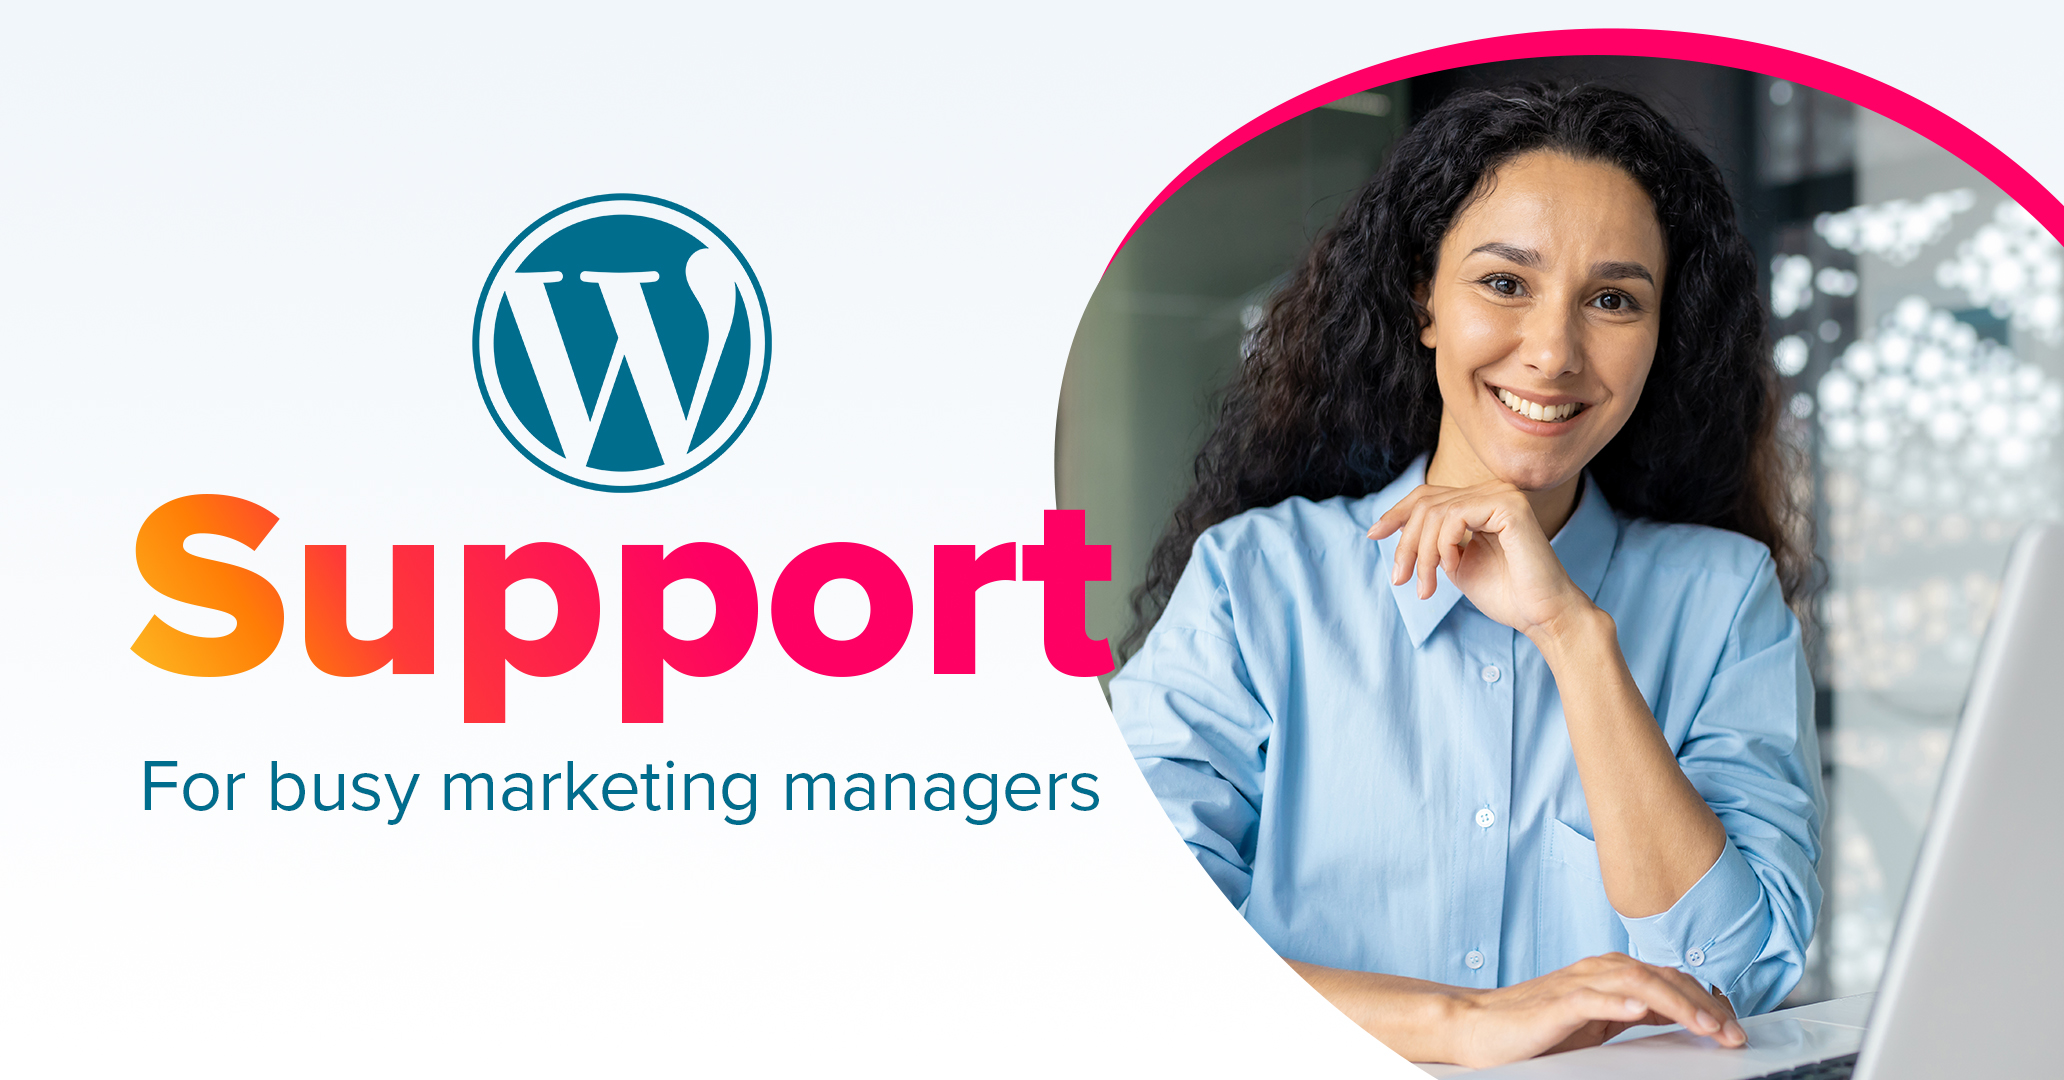 Unveiling our WordPress support package for busy Marketing Managers